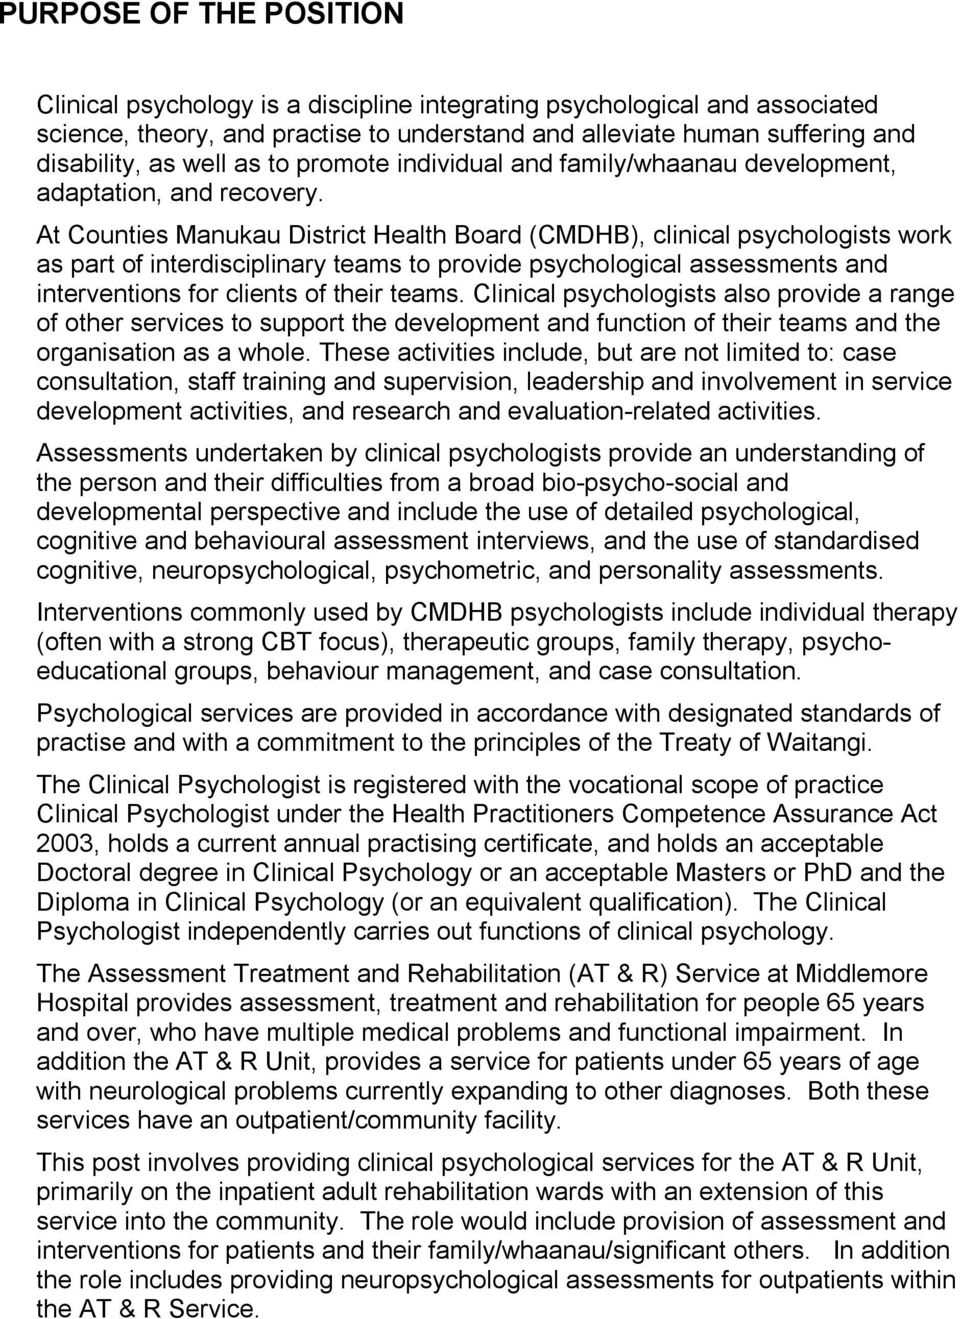 At Counties Manukau District Health Board (CMDHB), clinical psychologists work as part of interdisciplinary teams to provide psychological assessments and interventions for clients of their teams.